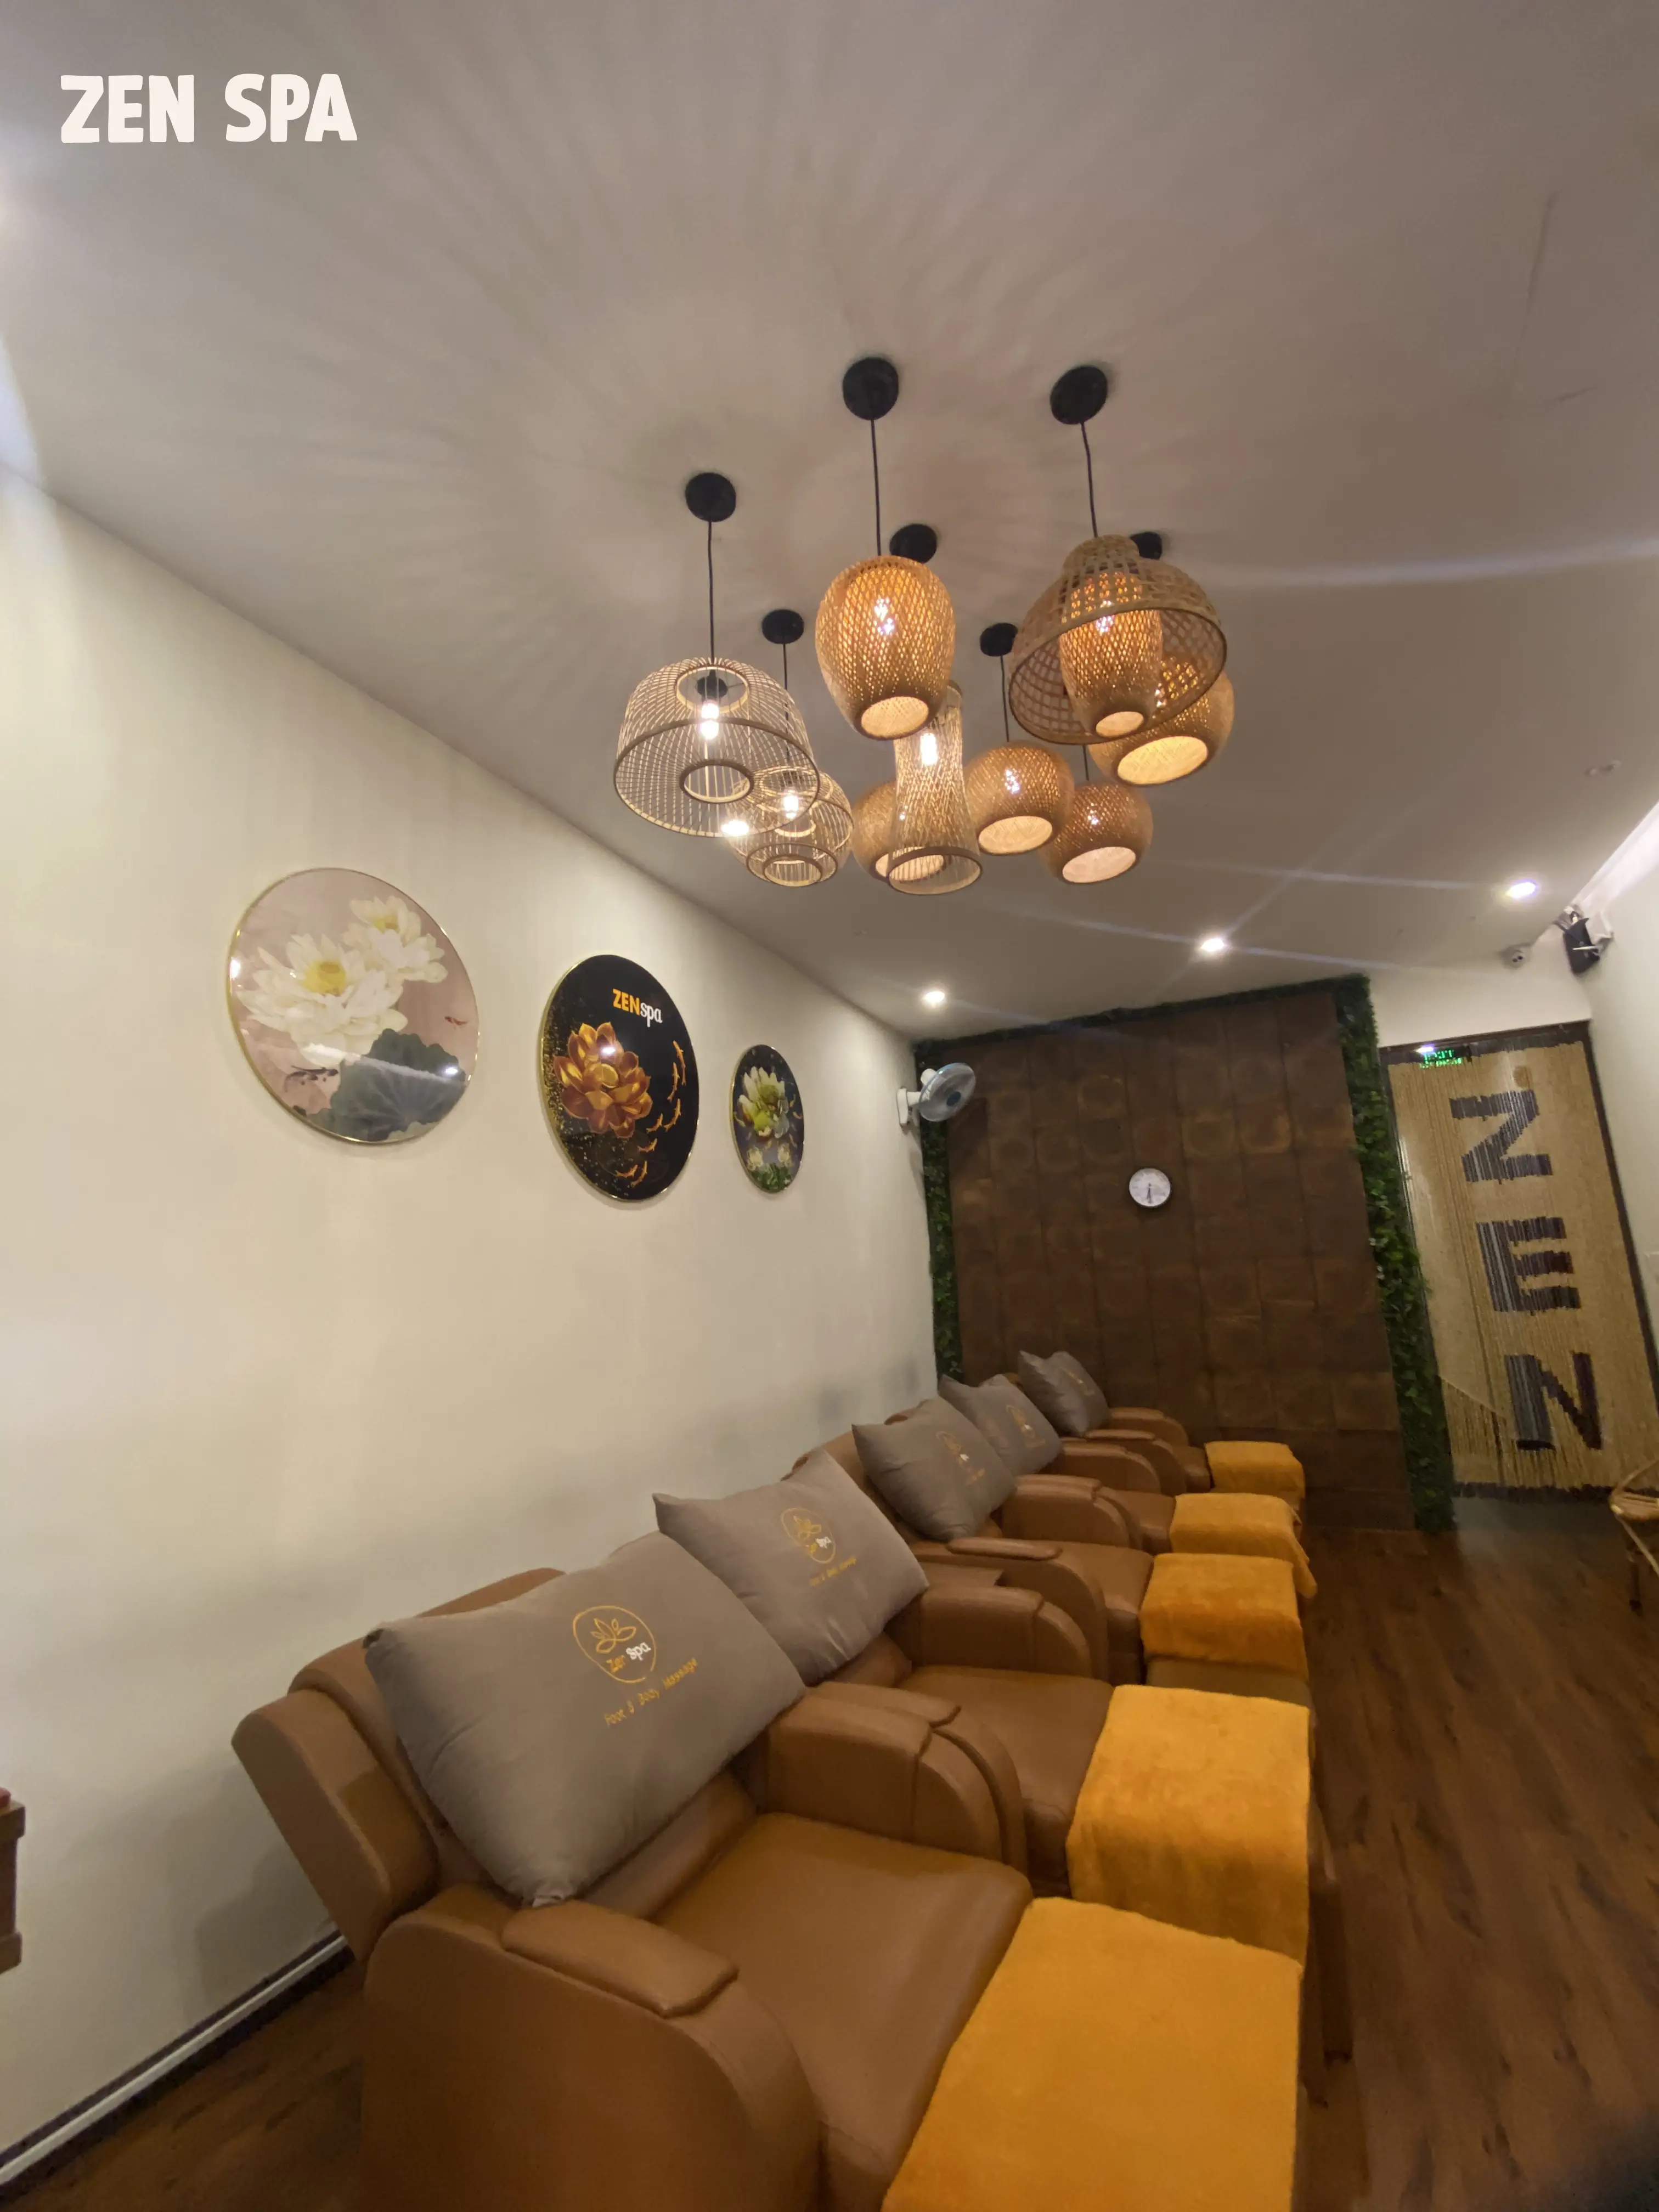 cheap and good massage spots in ho chi minh! 💆‍♀️'s images(4)